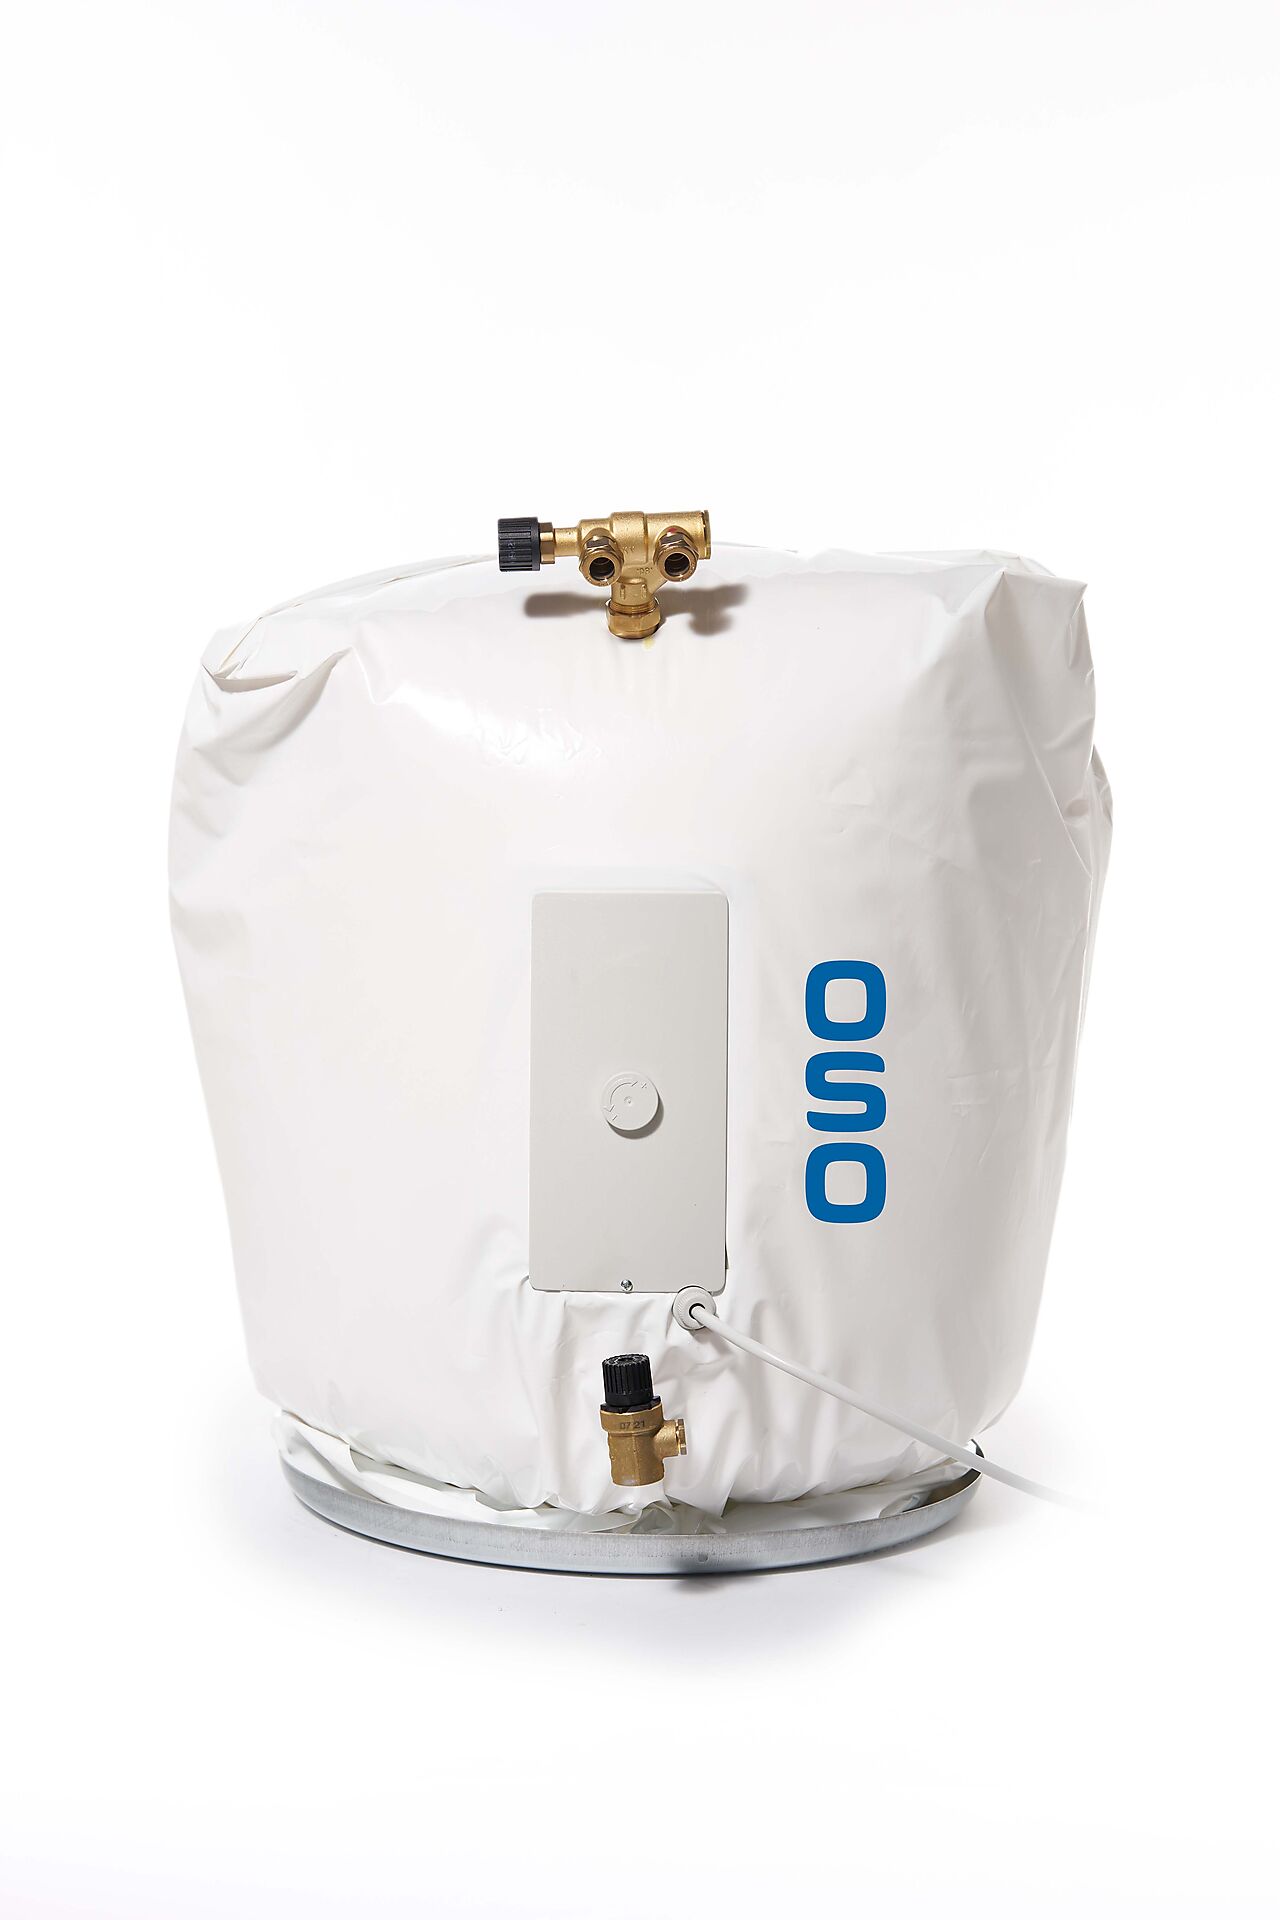 Oso Hotwater Boligbereder F100 2 kW+IQ for benk 1